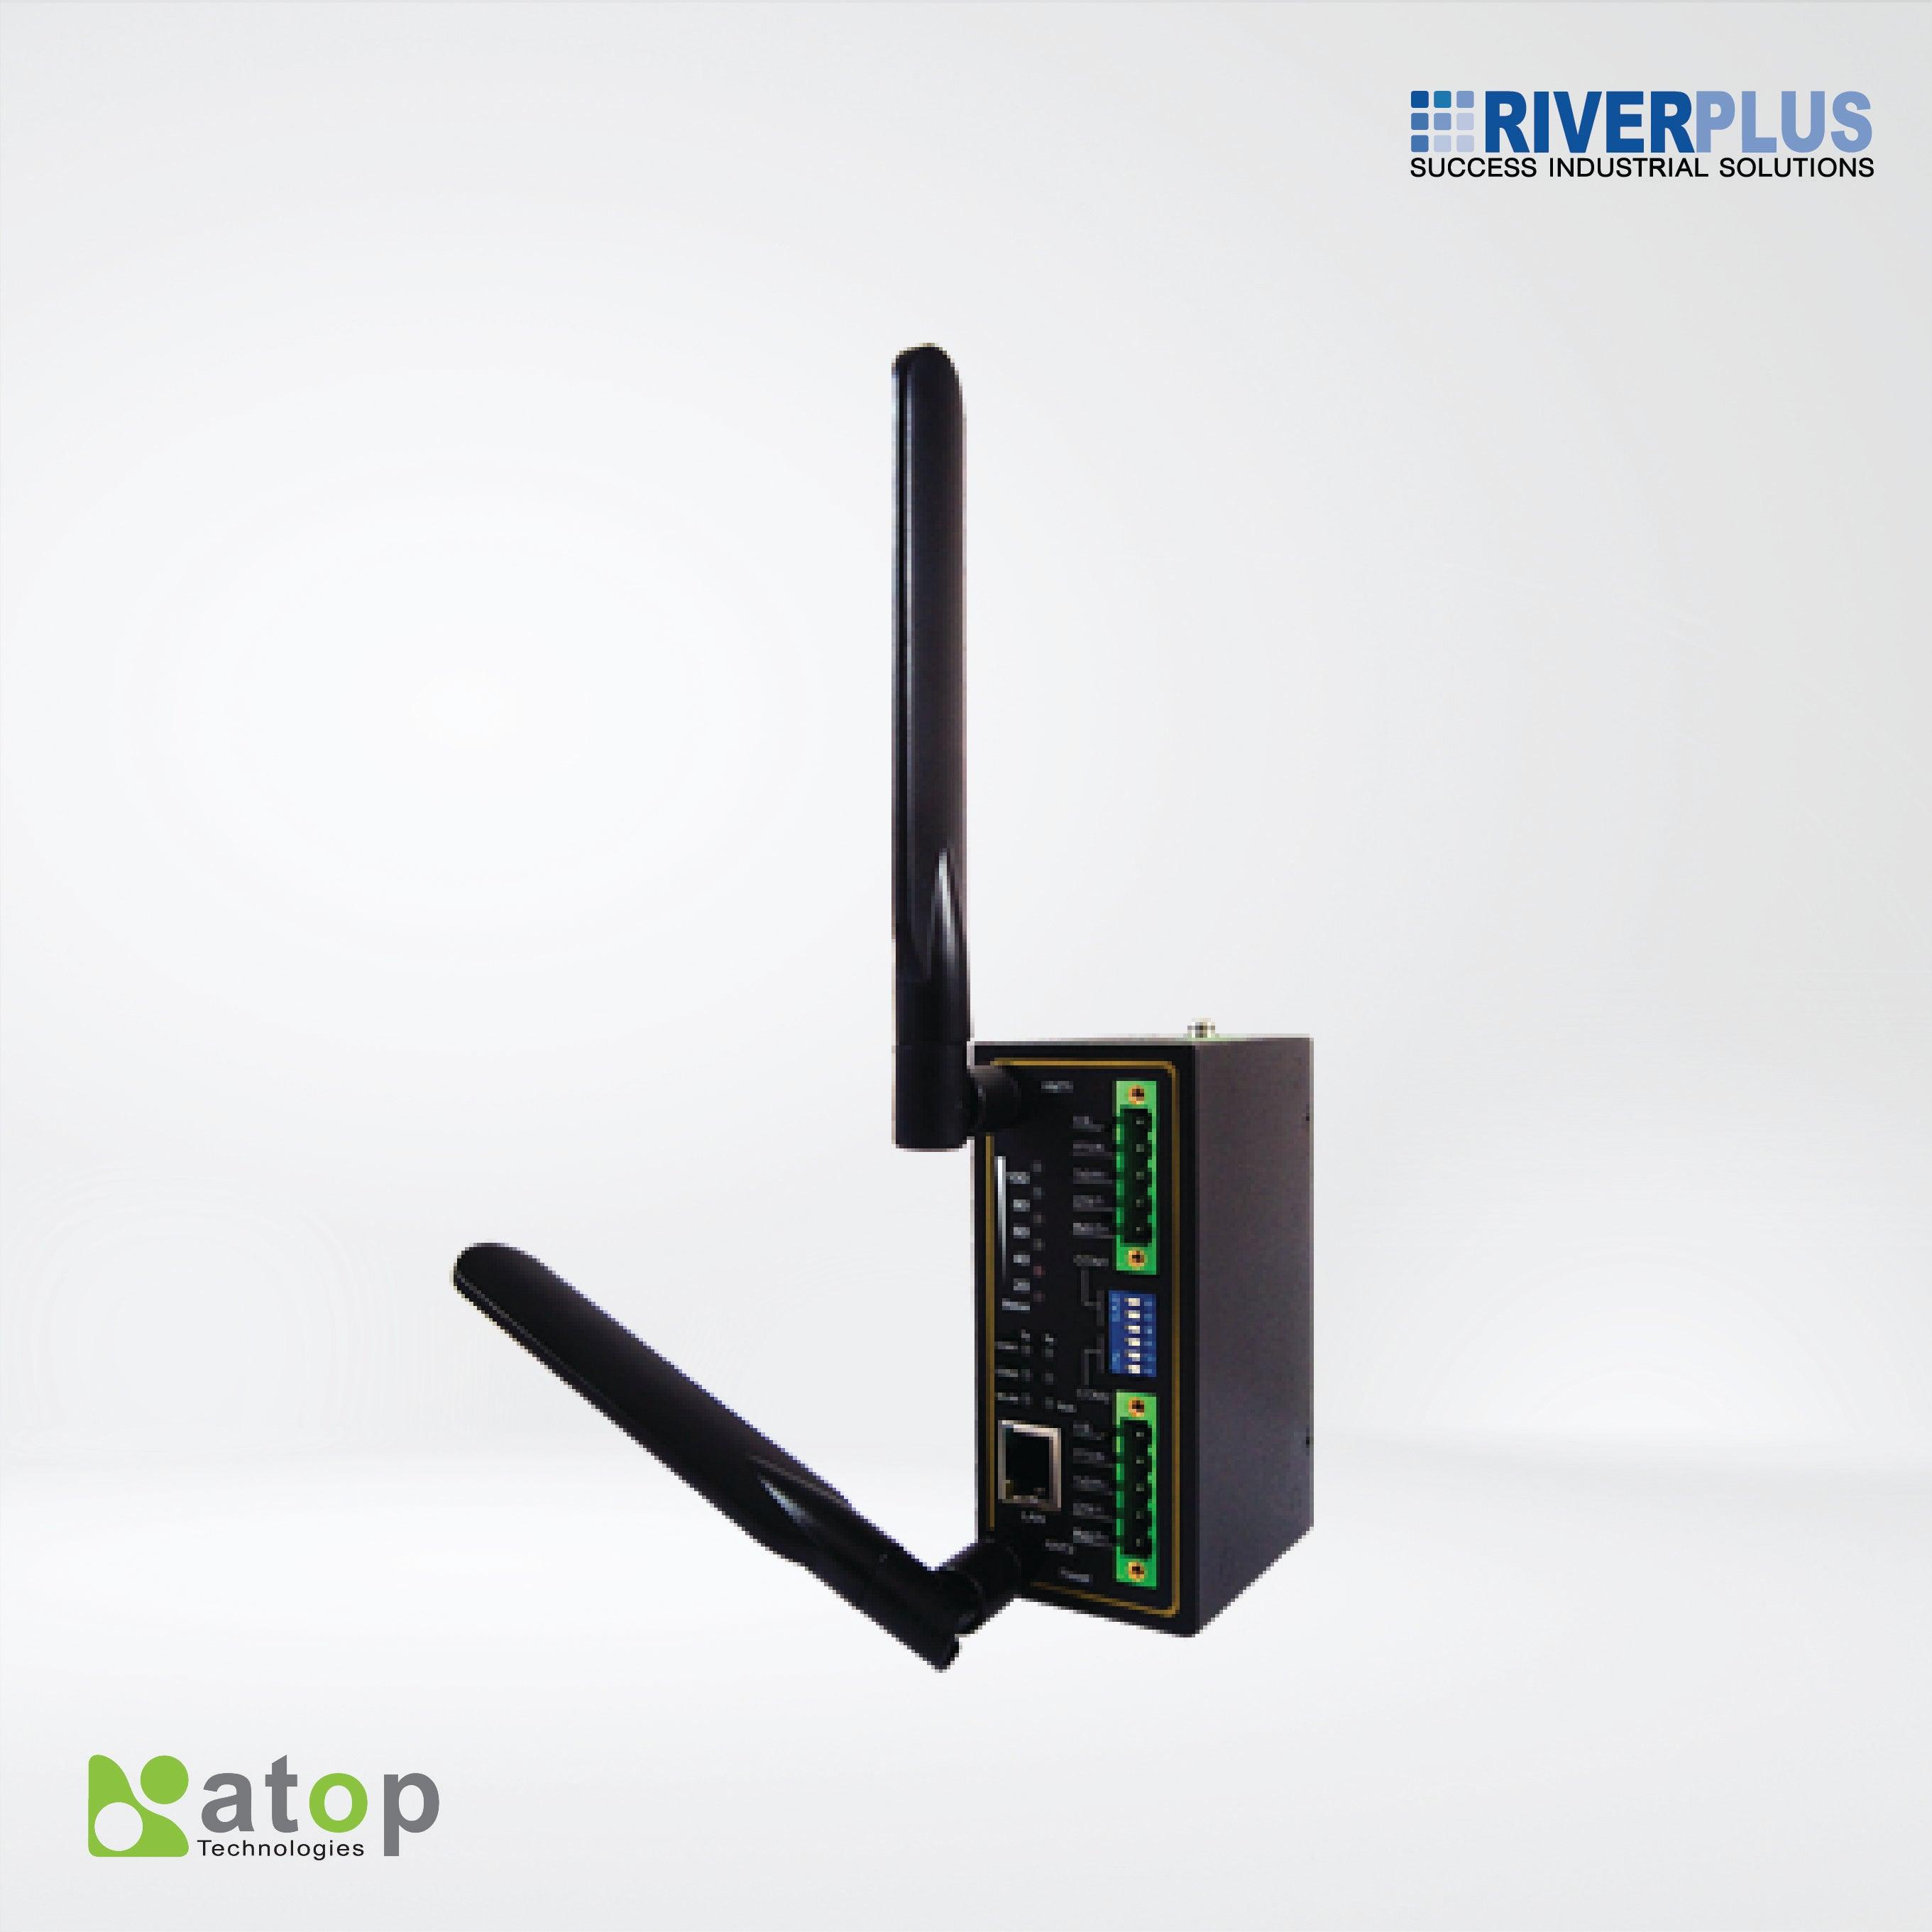 SW5502-SiS 2-port Industrial Wireless Serial Device Server, TB5 with serial isolation - Riverplus